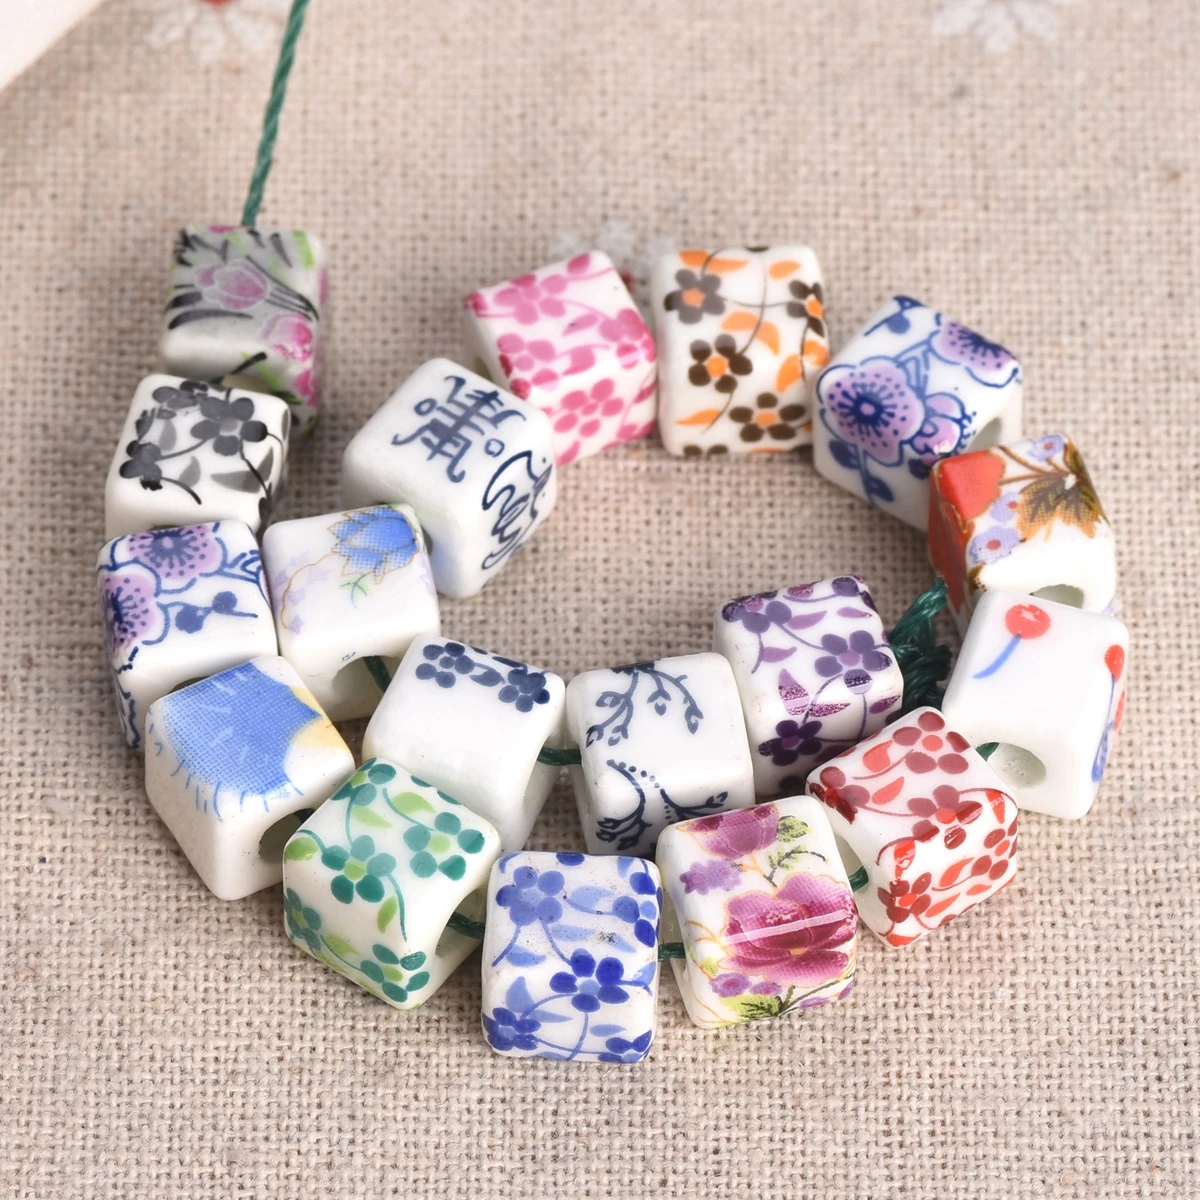 10pcs 10mm Cube Flower Patterns Ceramic Porcelain Loose Crafts Beads lot for DIY Jewelry Making